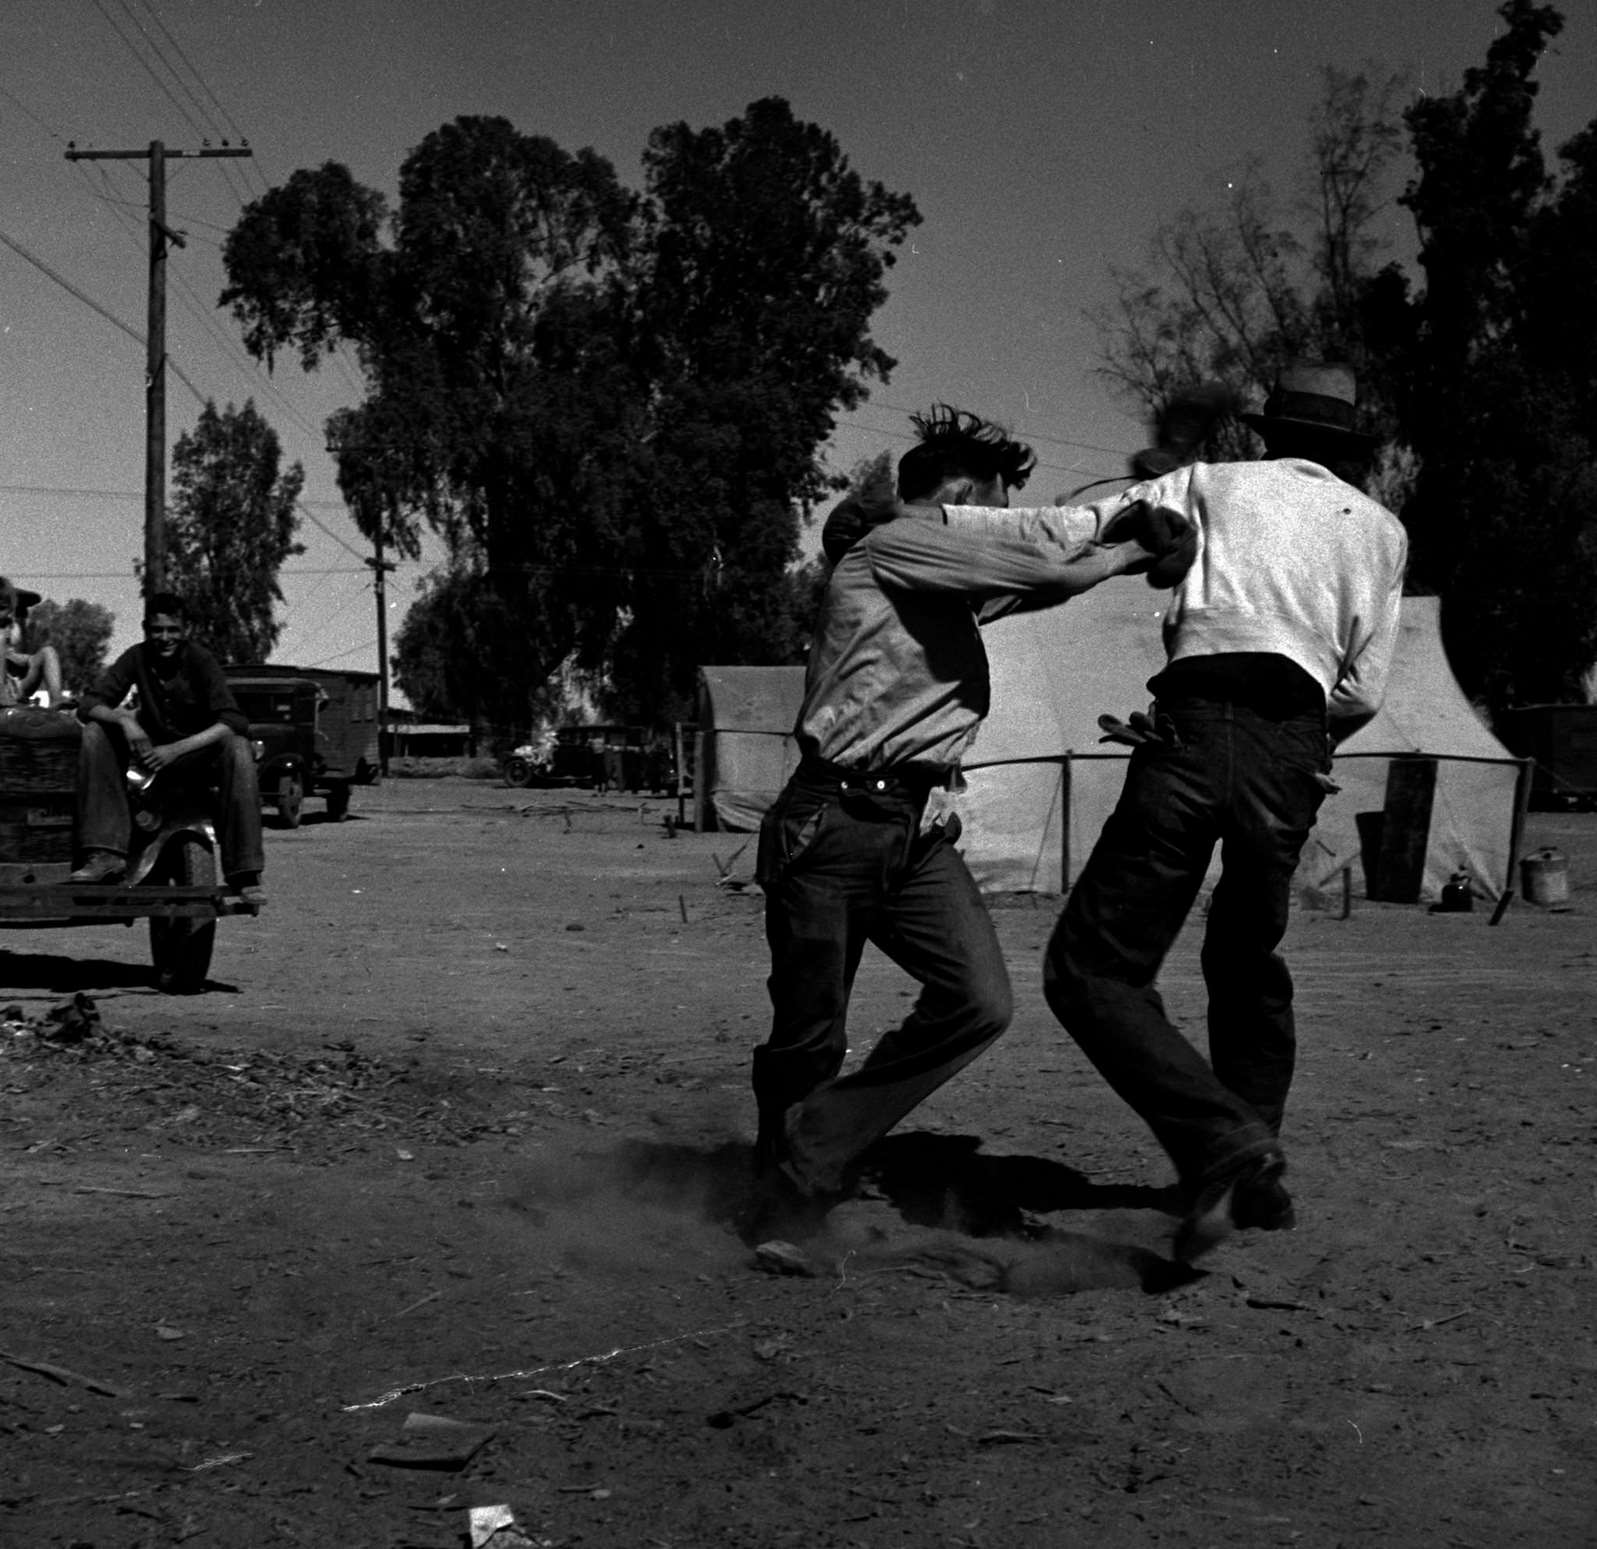 Recreation in a migratory agricultural workers' camp near Holtville, California 1939